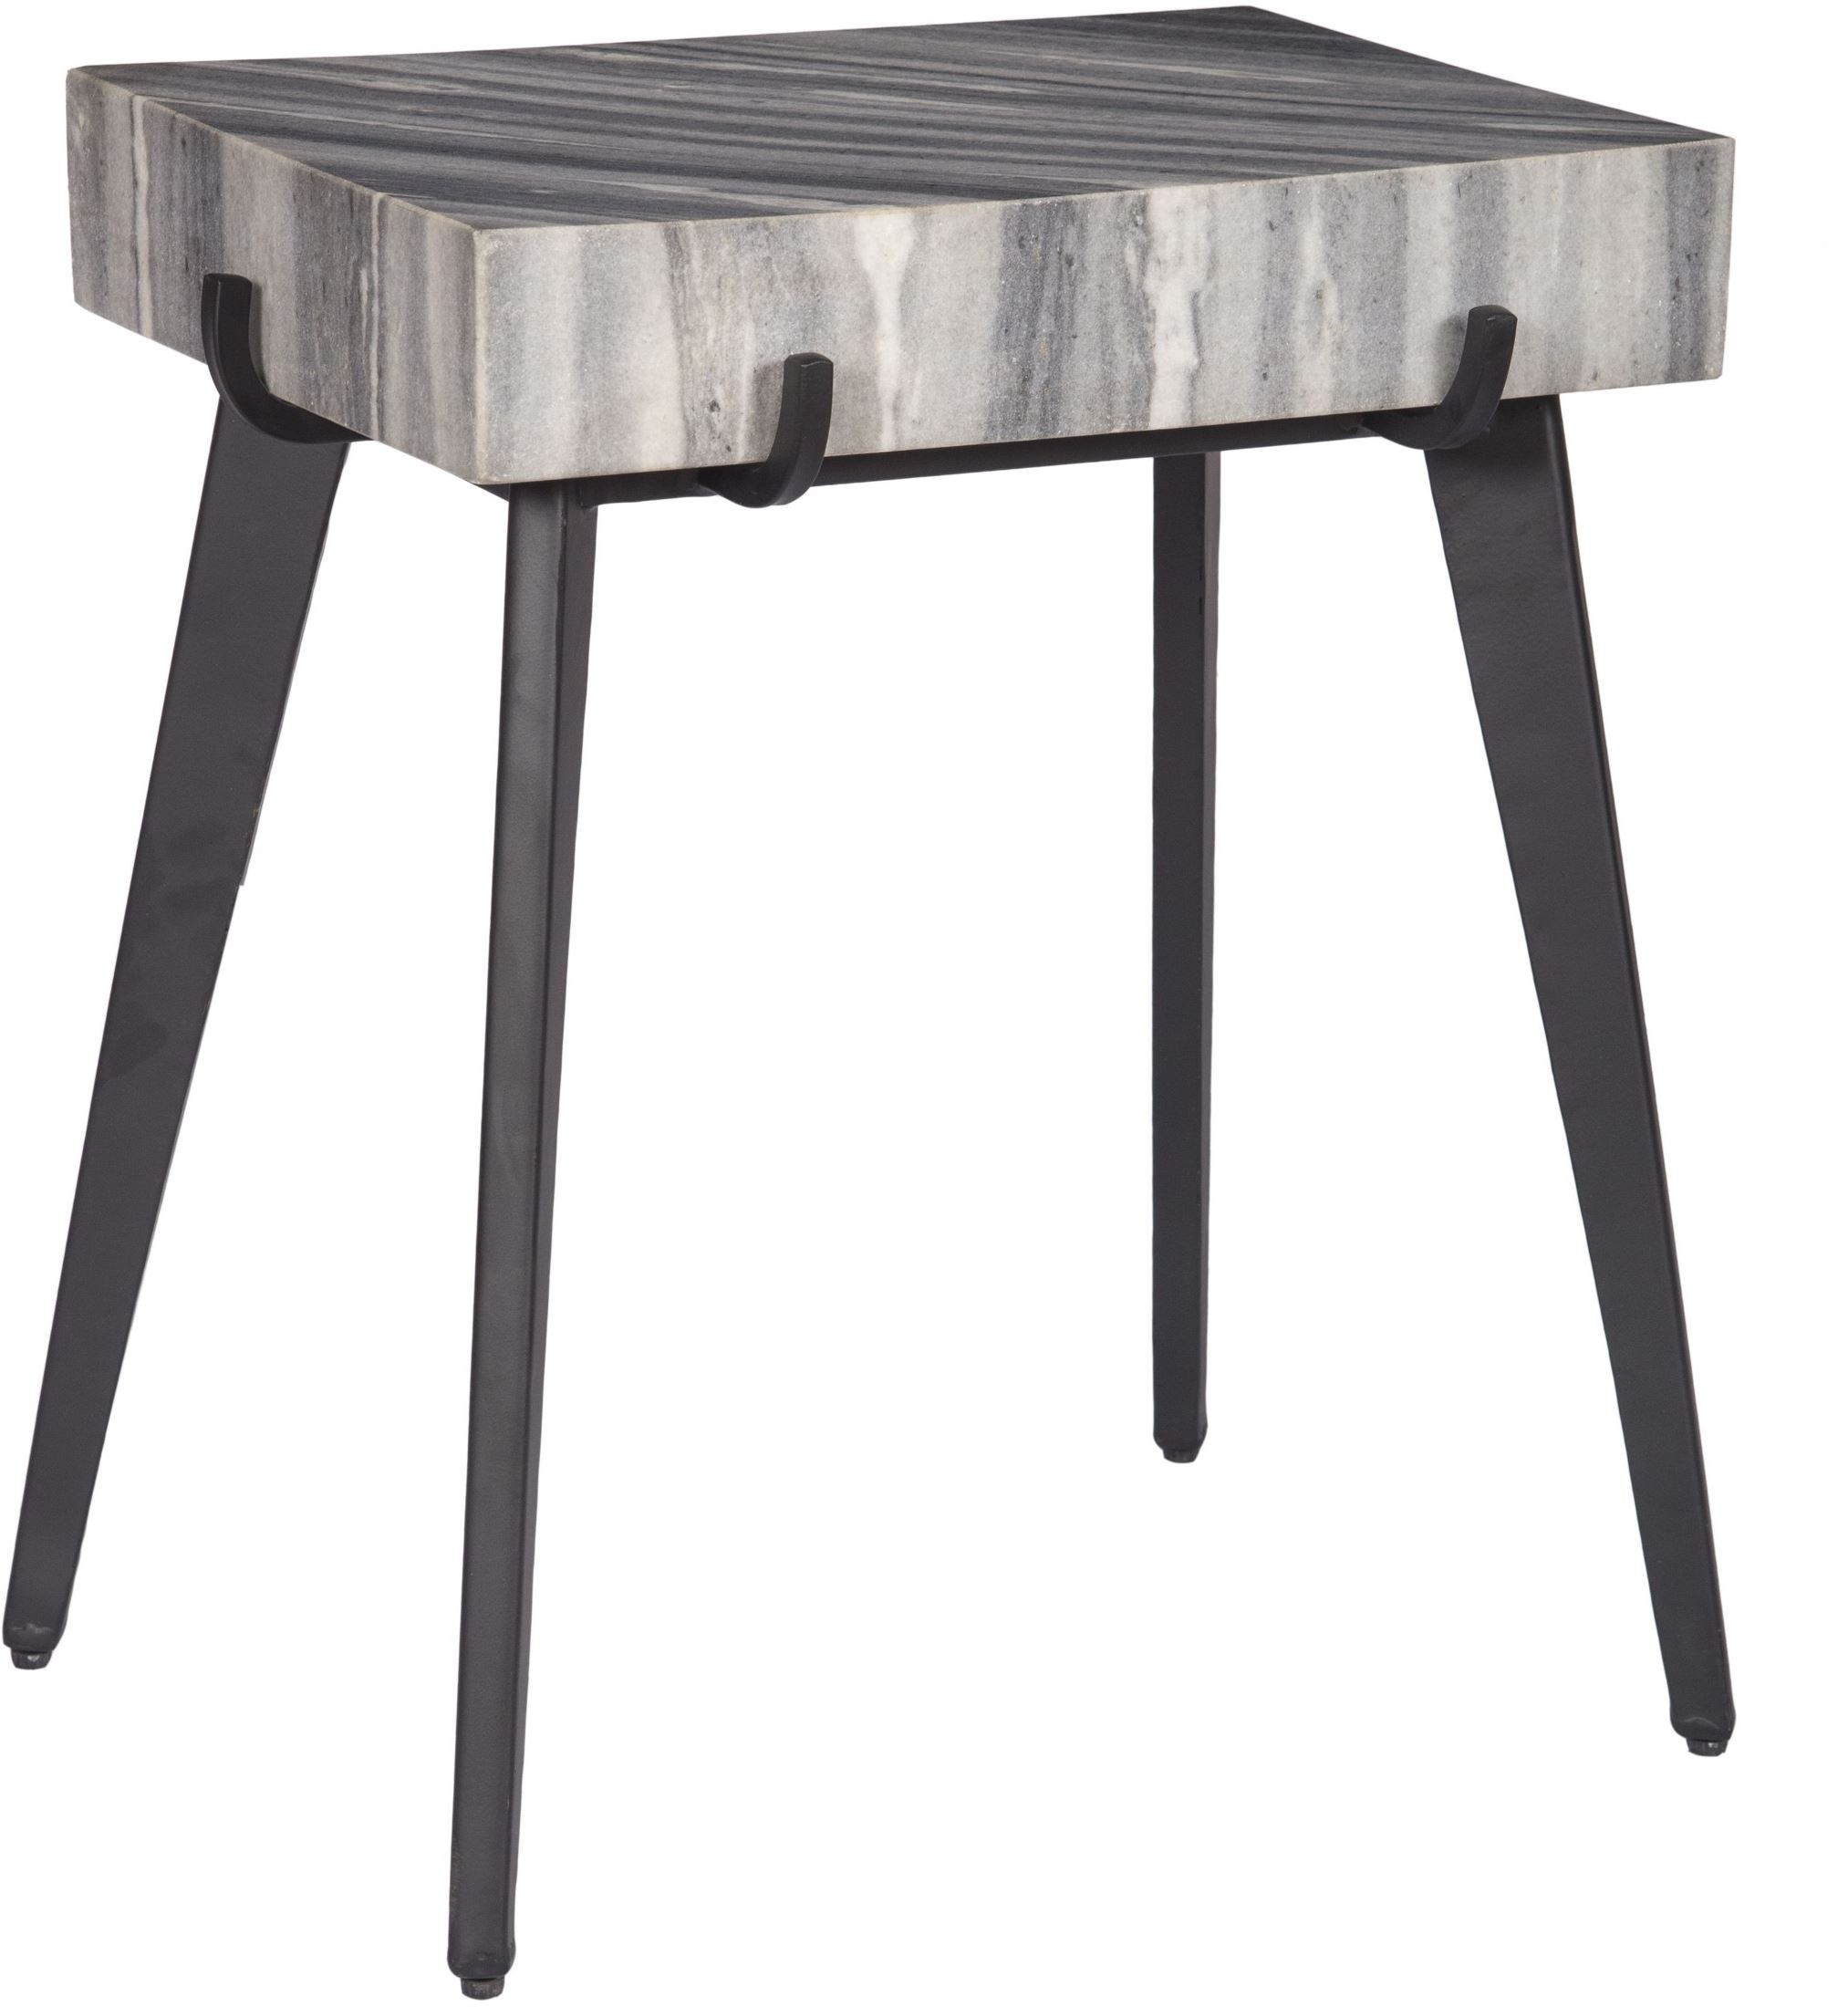 grey accent table from coast coleman furniture piece cocktail sets sectional sofa decor cabinets double drop leaf leick chairside end front door threshold plate keter ice bucket